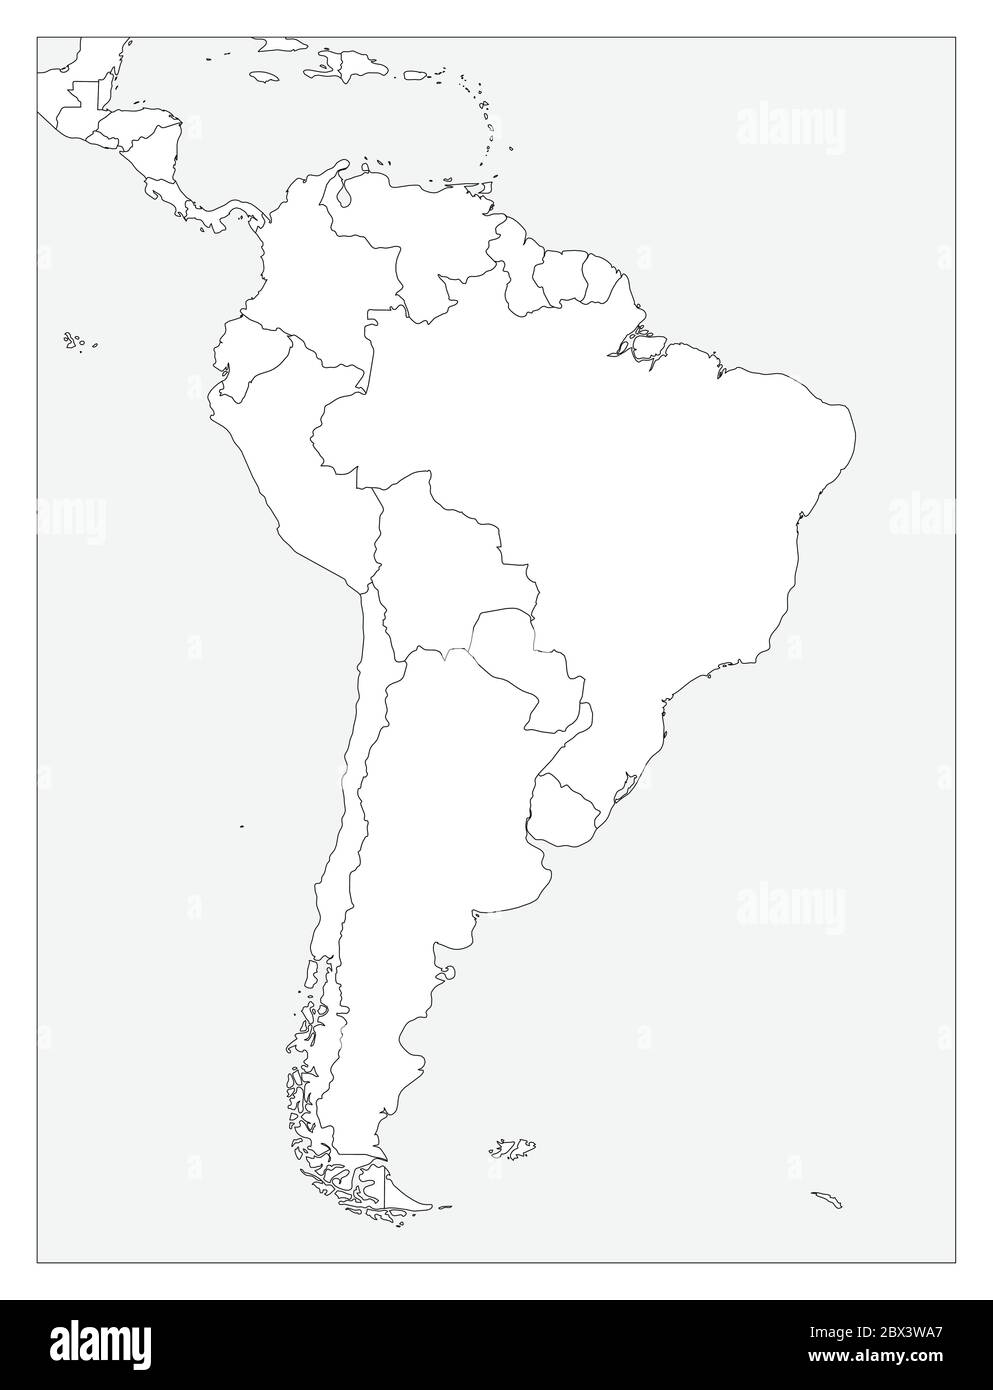 Blank political map of South America. Simple flat vector outline map ...